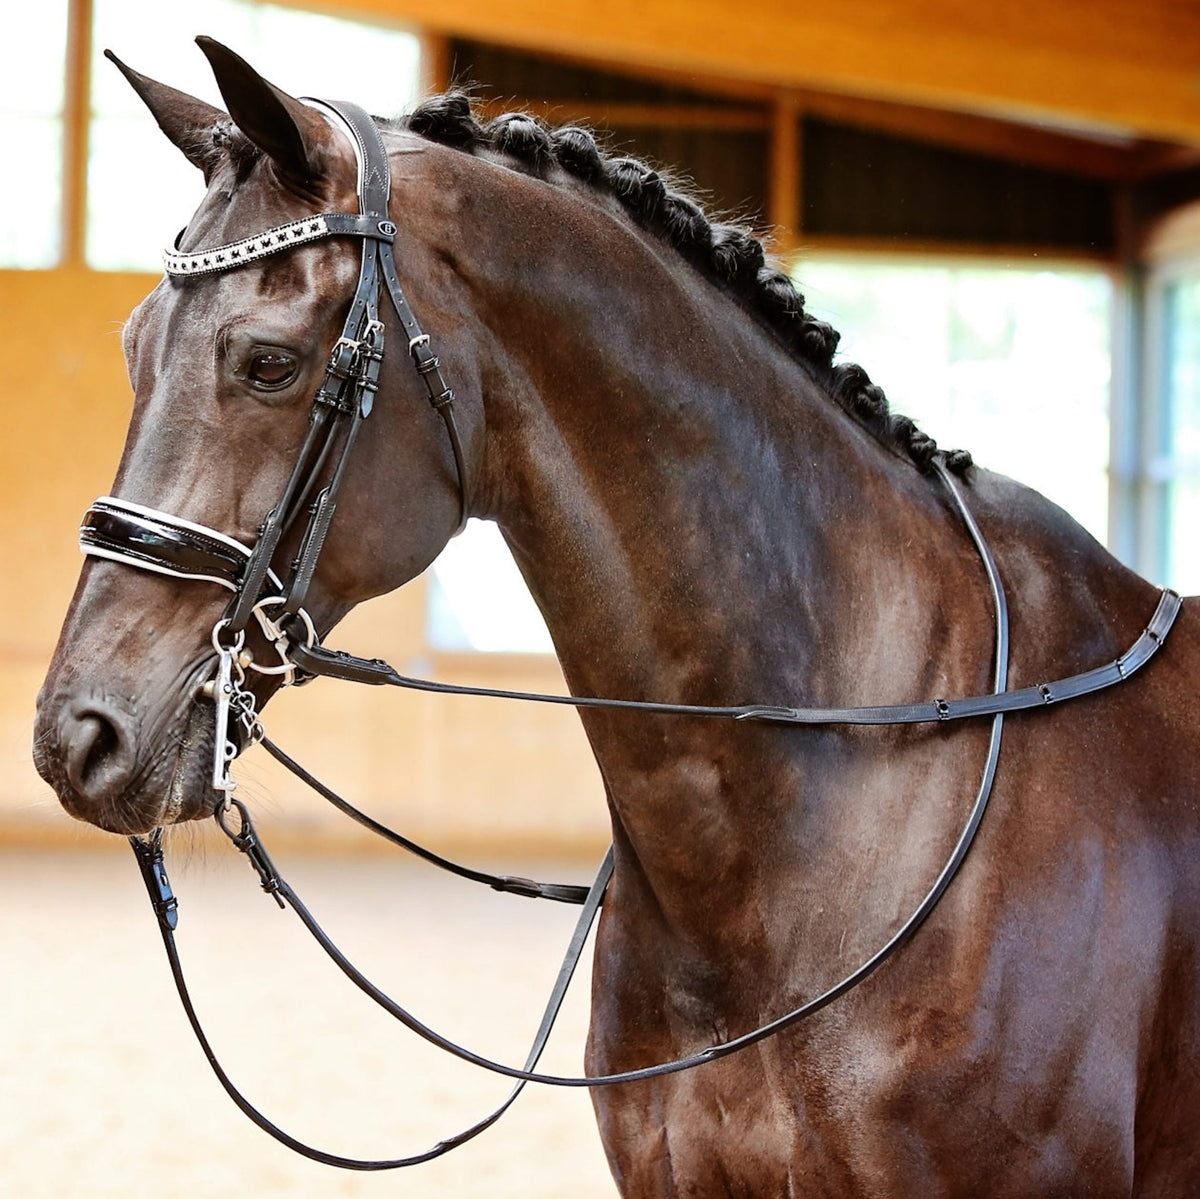 Black leather bridle with rolled cheek pieces and soft leather reins.